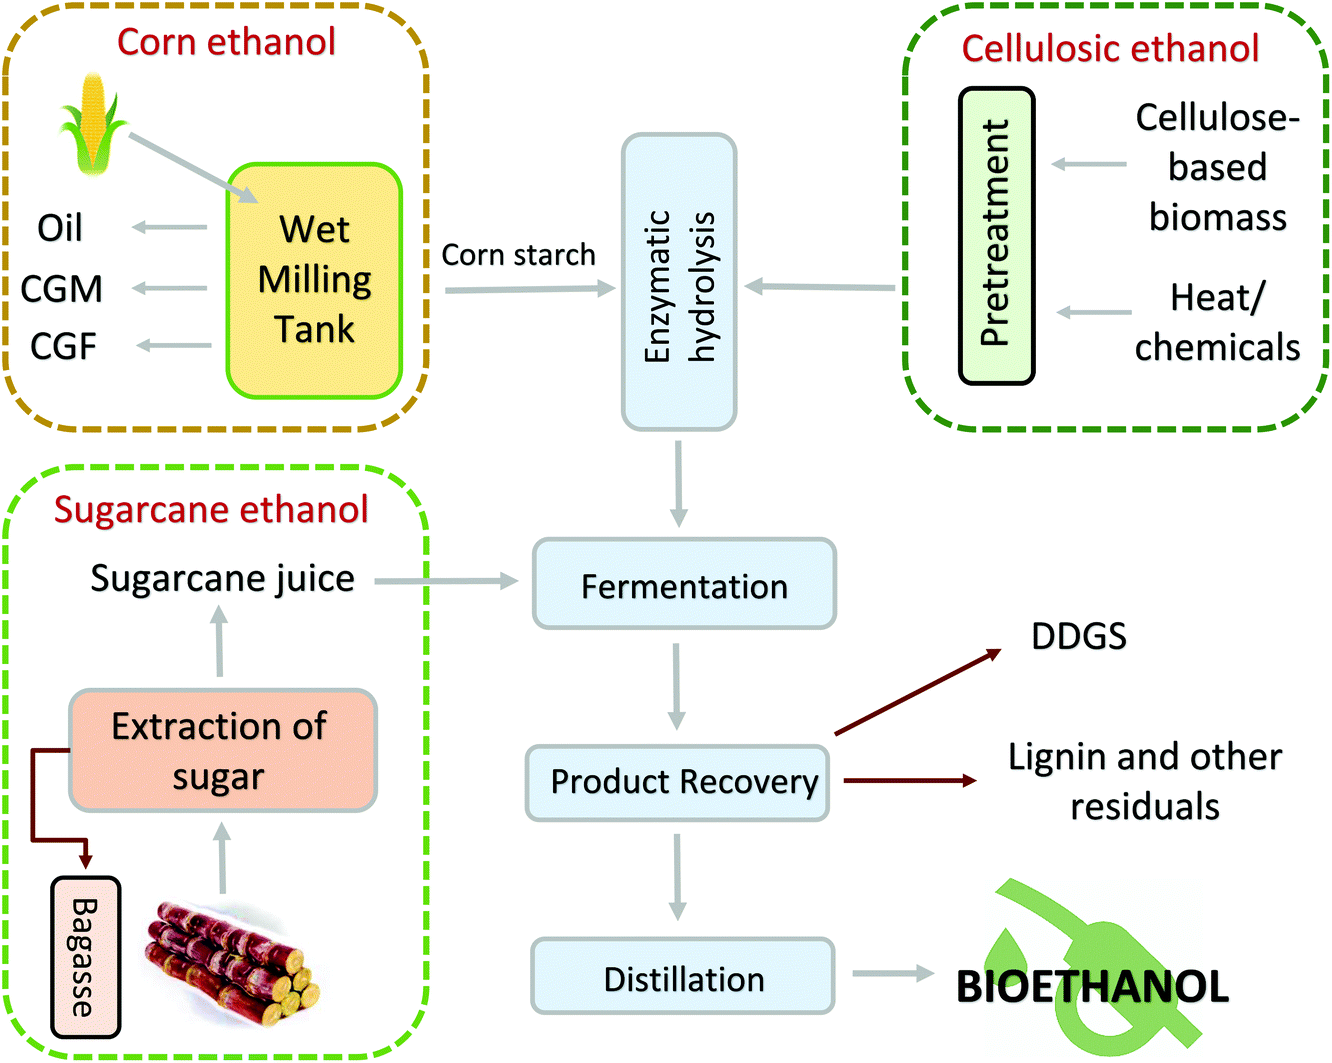 Emerging techniques in bioethanol production: from distillation to waste  valorization - Green Chemistry (RSC Publishing) DOI:10.1039/C8GC02698J